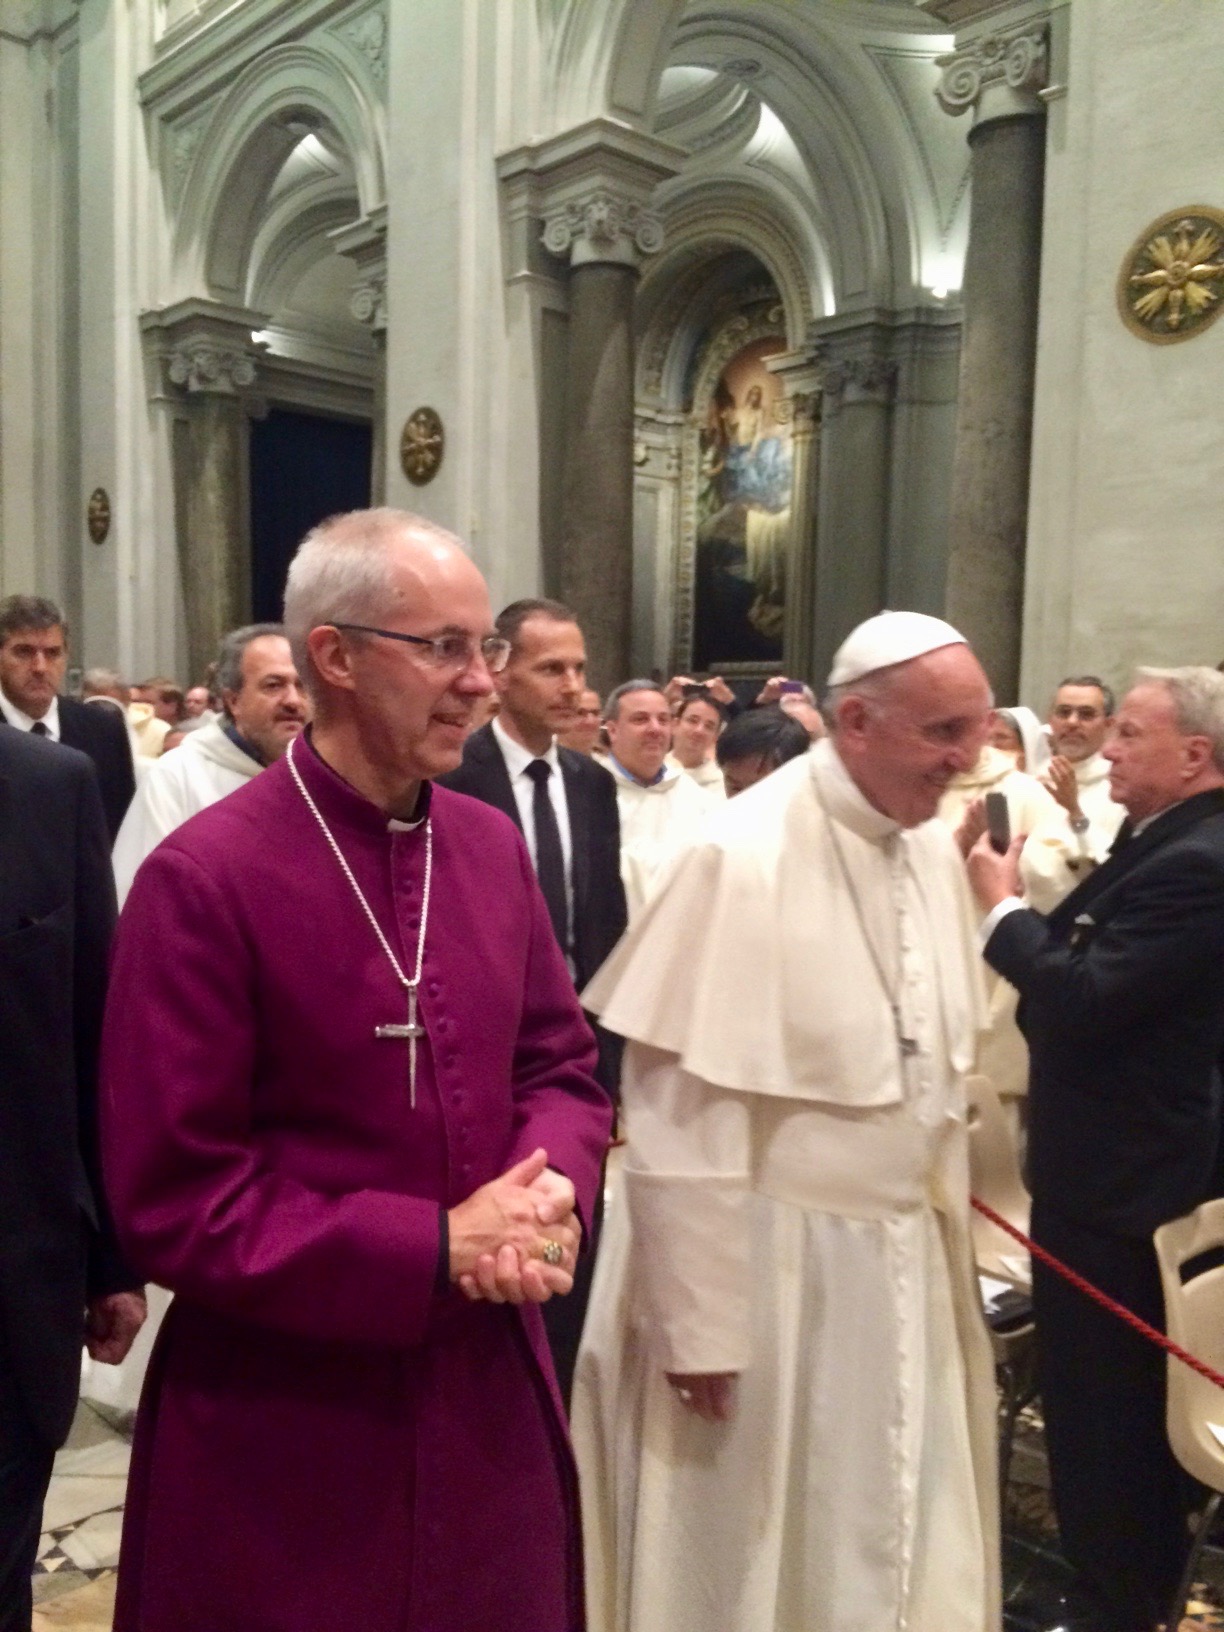 Archbishop Justin Welby and Pope Francis entering San Gregorio al Celio for the ecumenical vespers